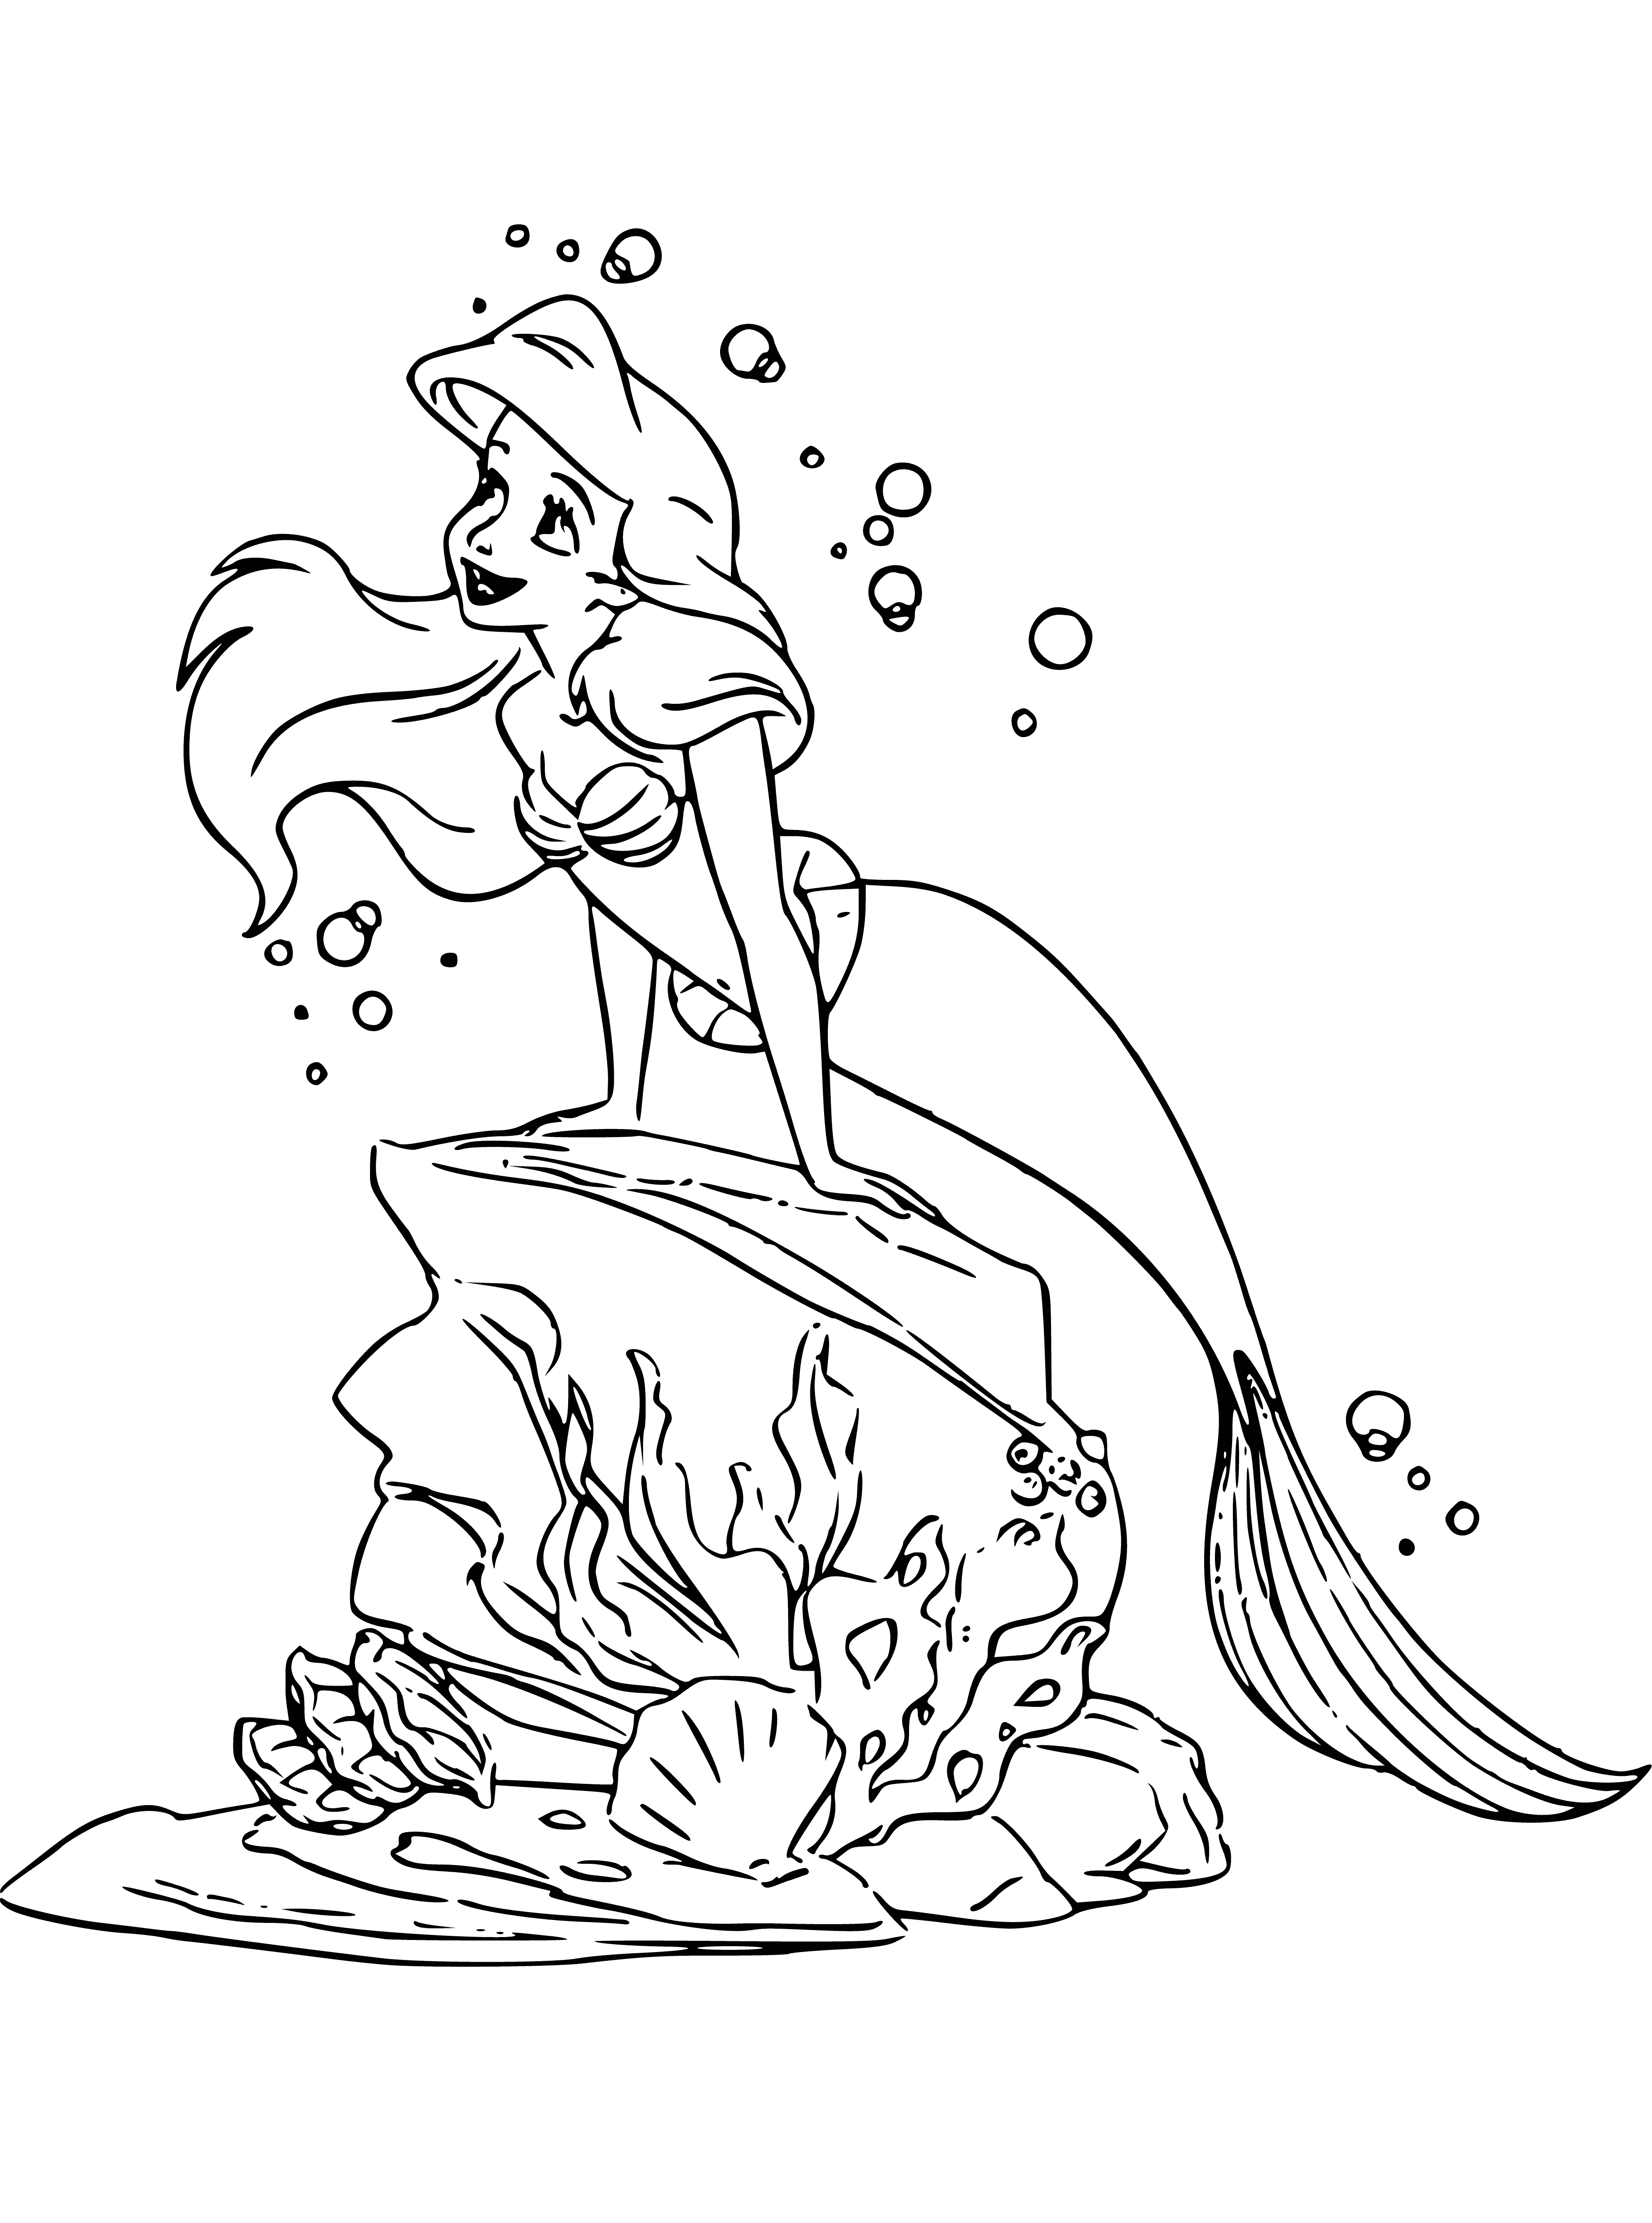 The little mermaid on the stone coloring page